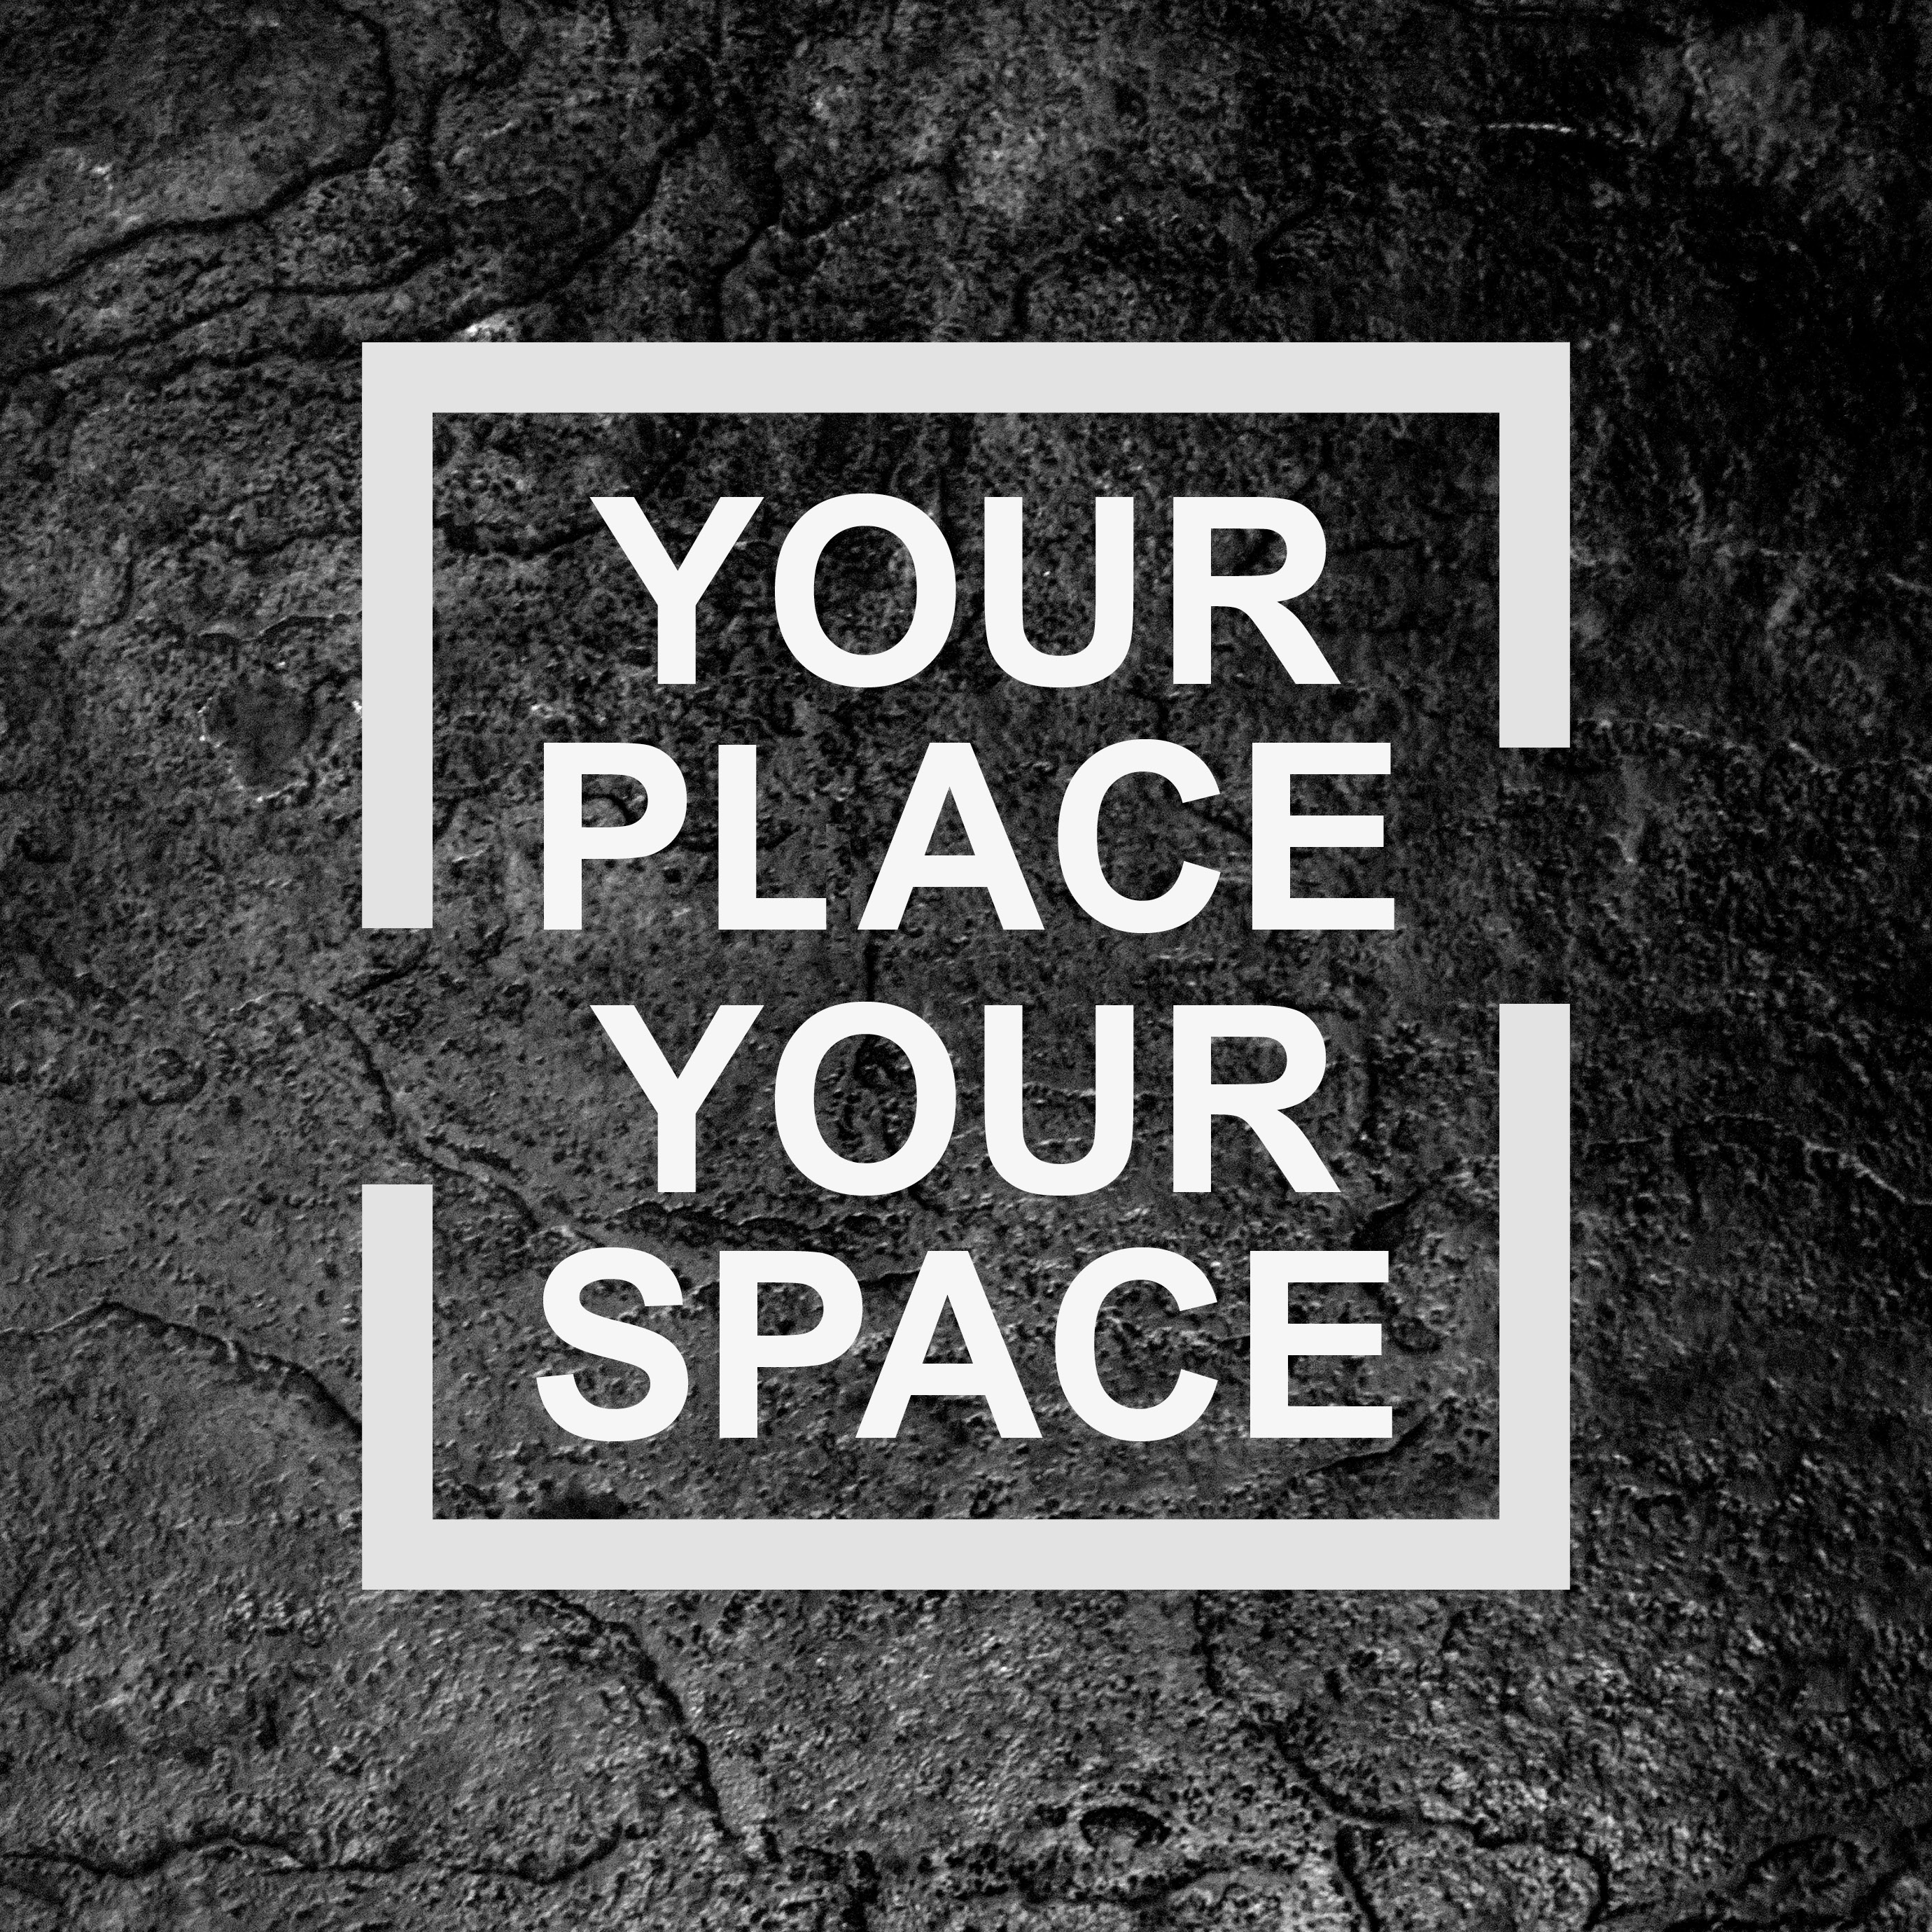 Introducing Your Place Your Space - engaging people with passion for their place